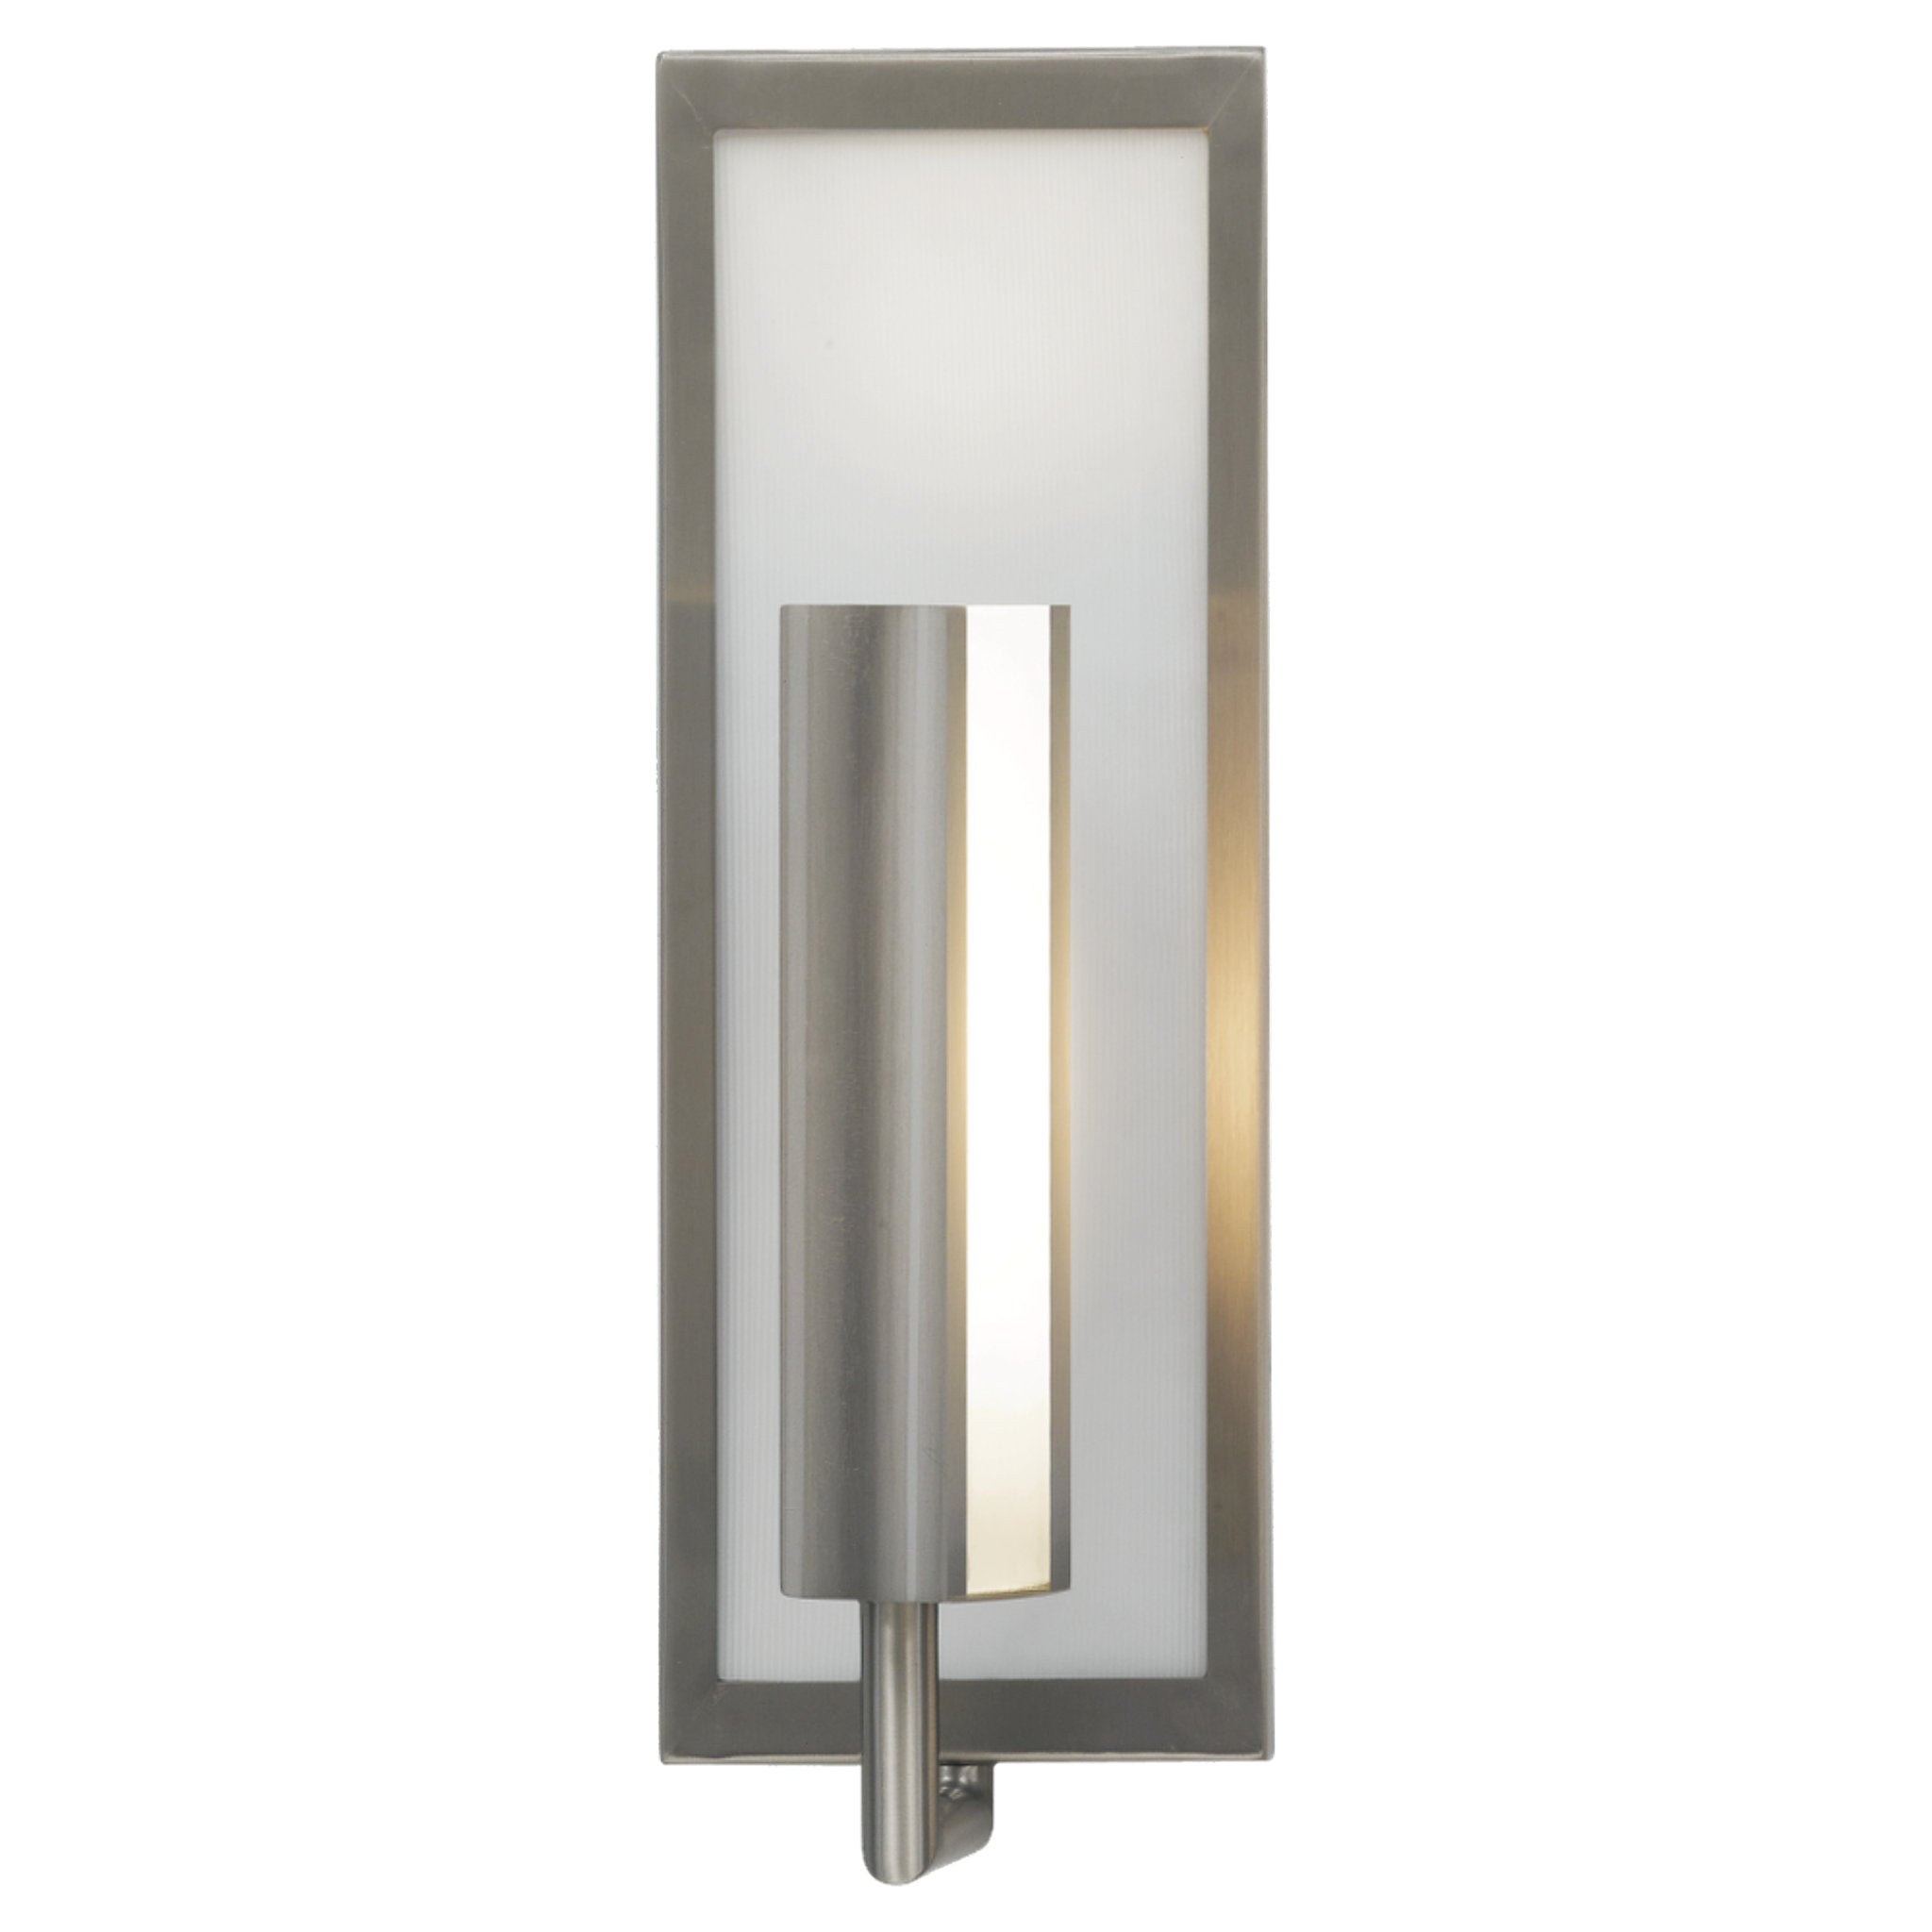 Mila Wall Sconce Modern Bath Fixture 5" Width 14.75" Height Steel Rectangular White Opal Etched Shade in Brushed